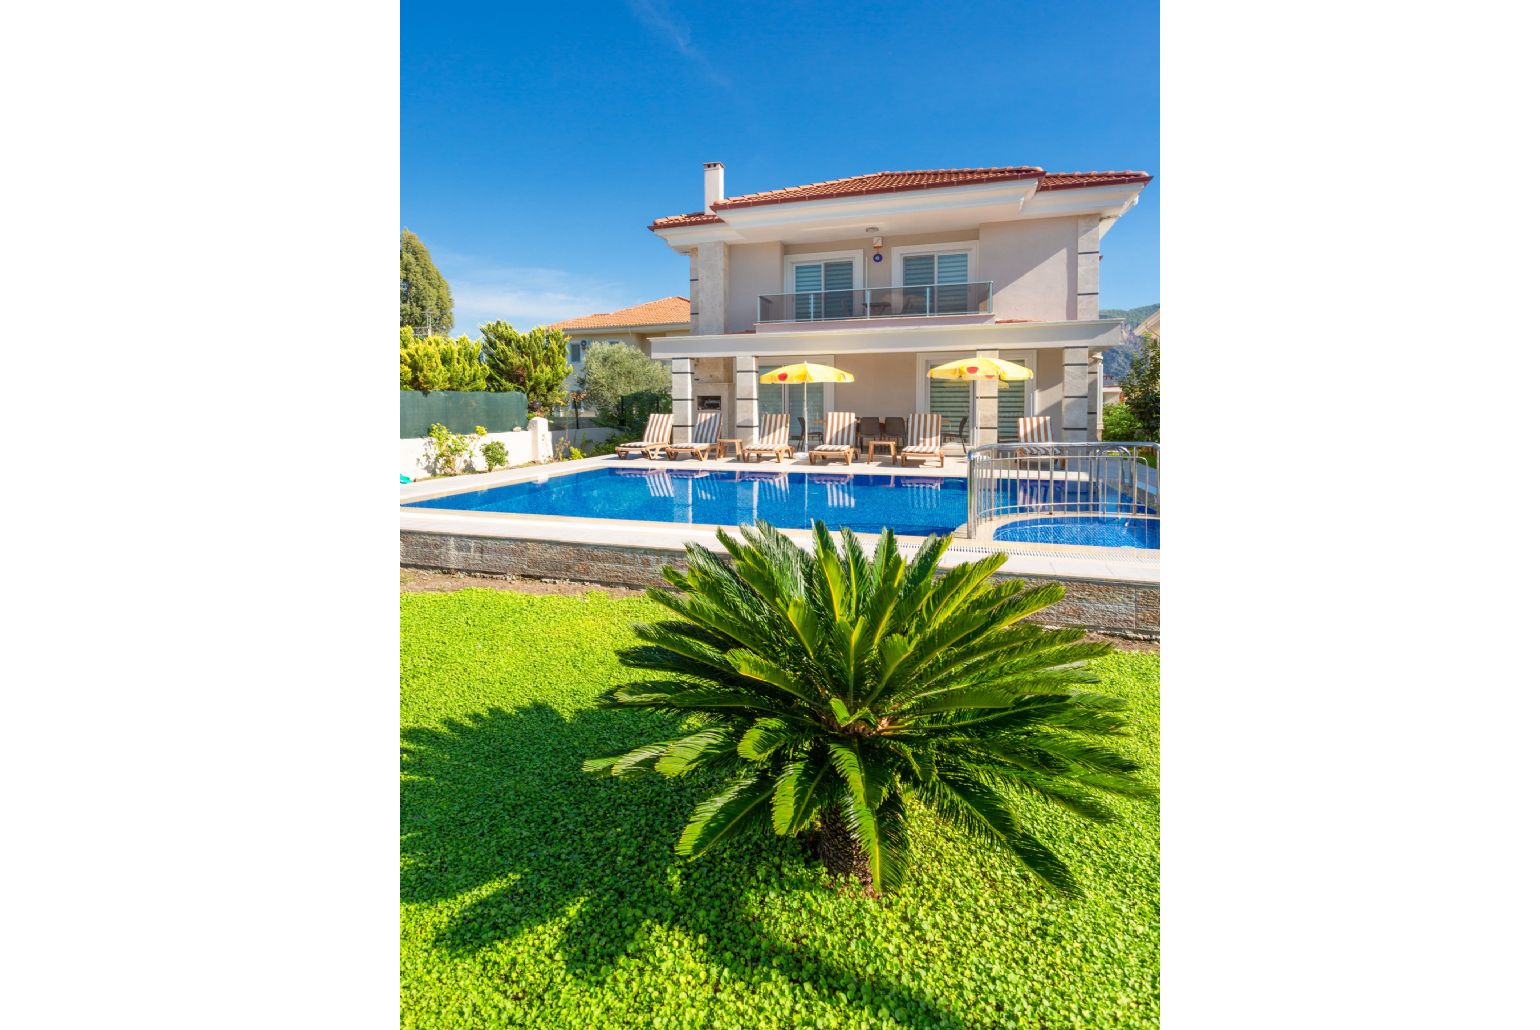 Beautiful villa with private pool, terrace, and garden area